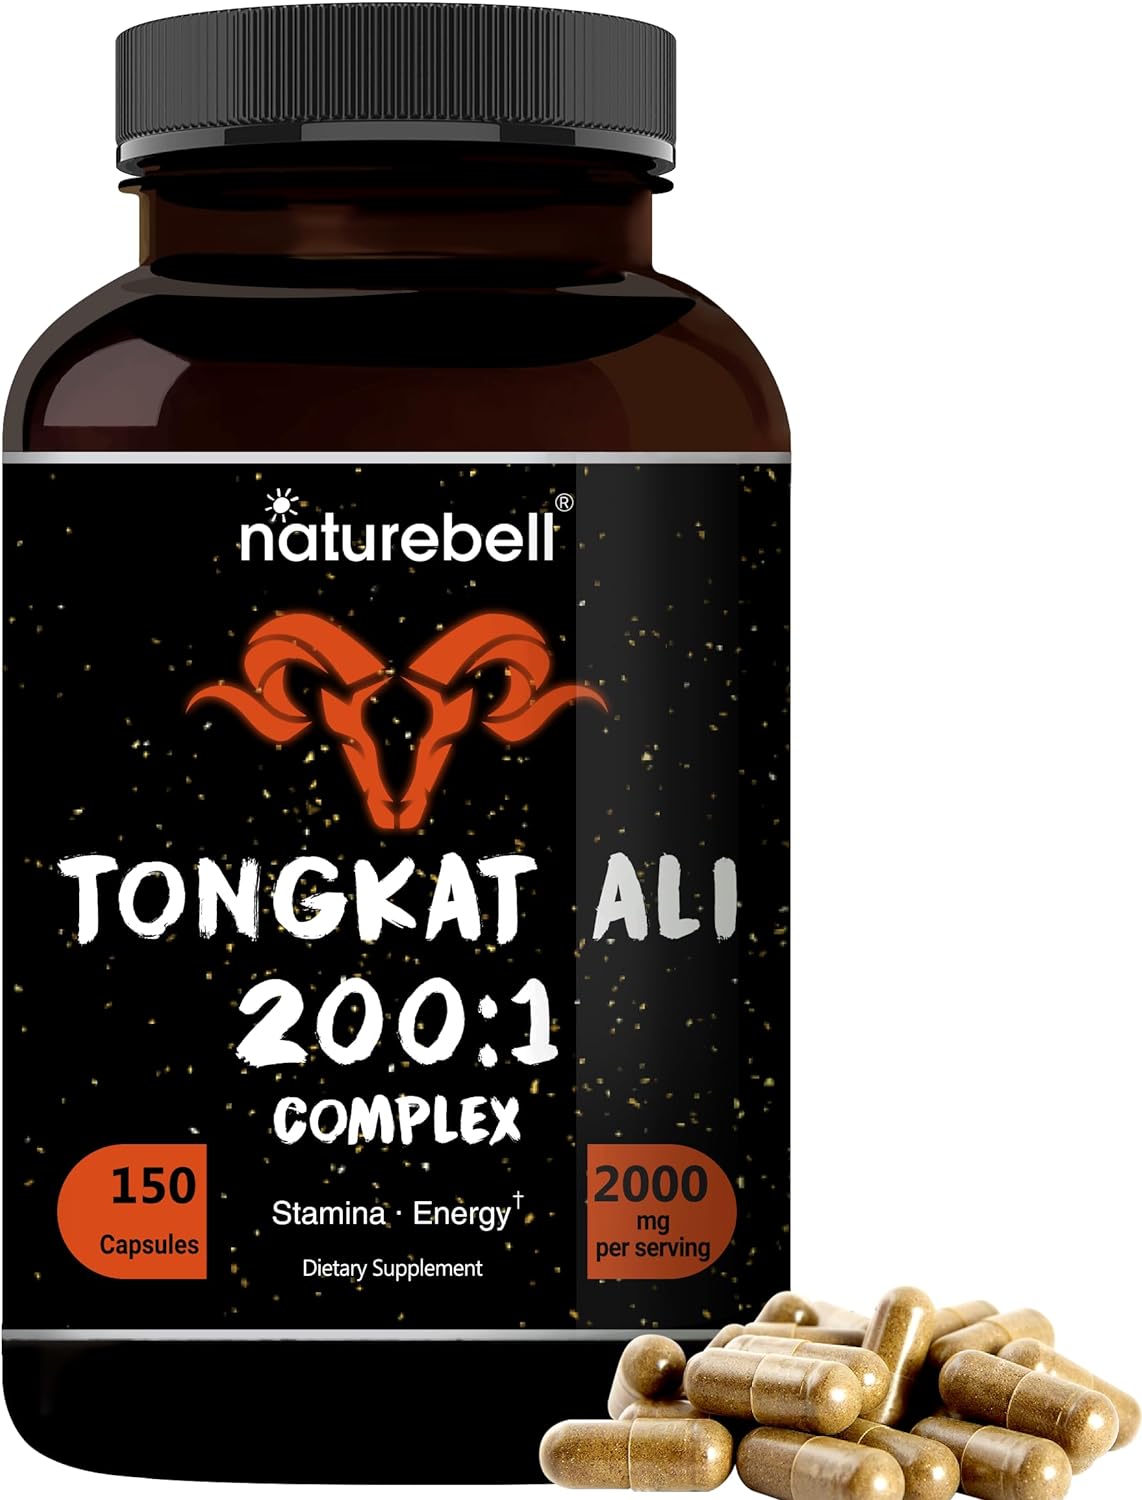 NatureBell Tongkat Ali 200:1 Extract for Men, 2000mg Per Serving, Indonesia Origin, Eurycoma Longifolia | with Panax Gin